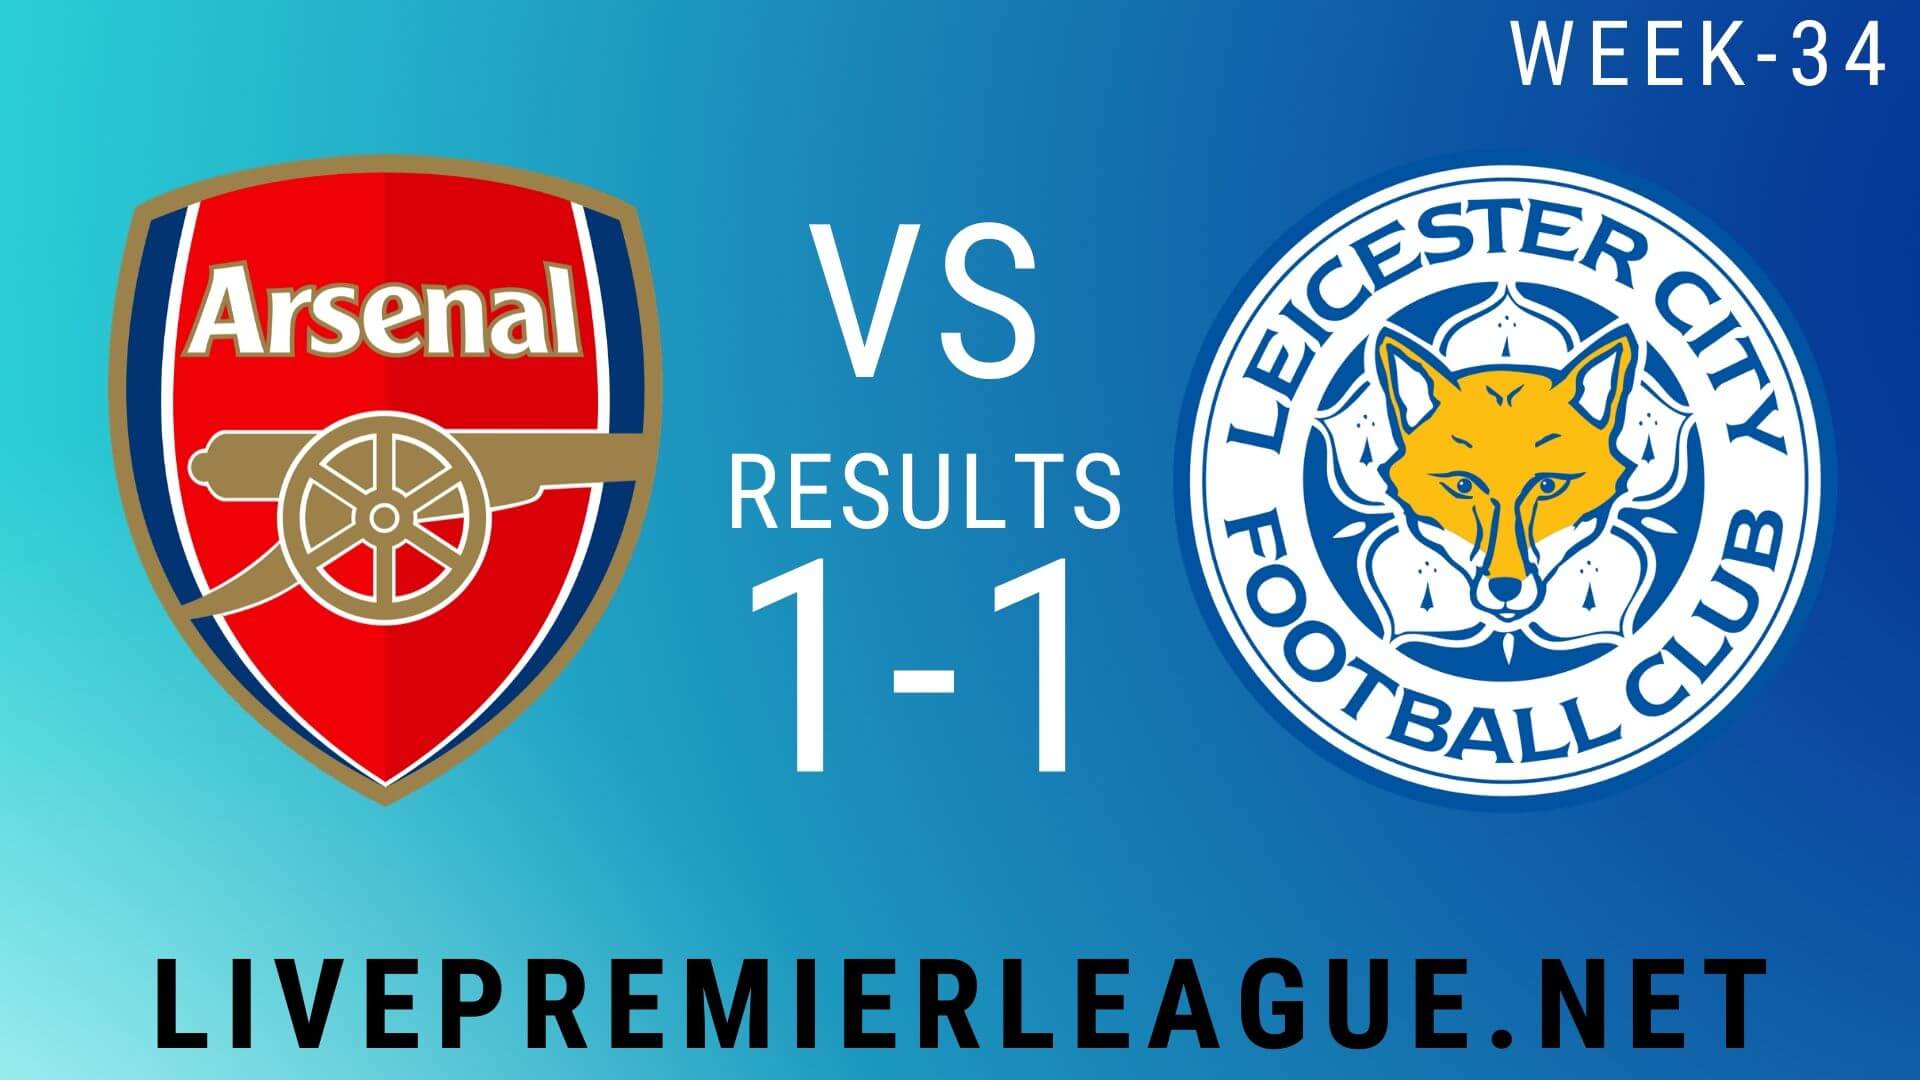 Arsenal Vs Leicester City | Week 34 Result 2020